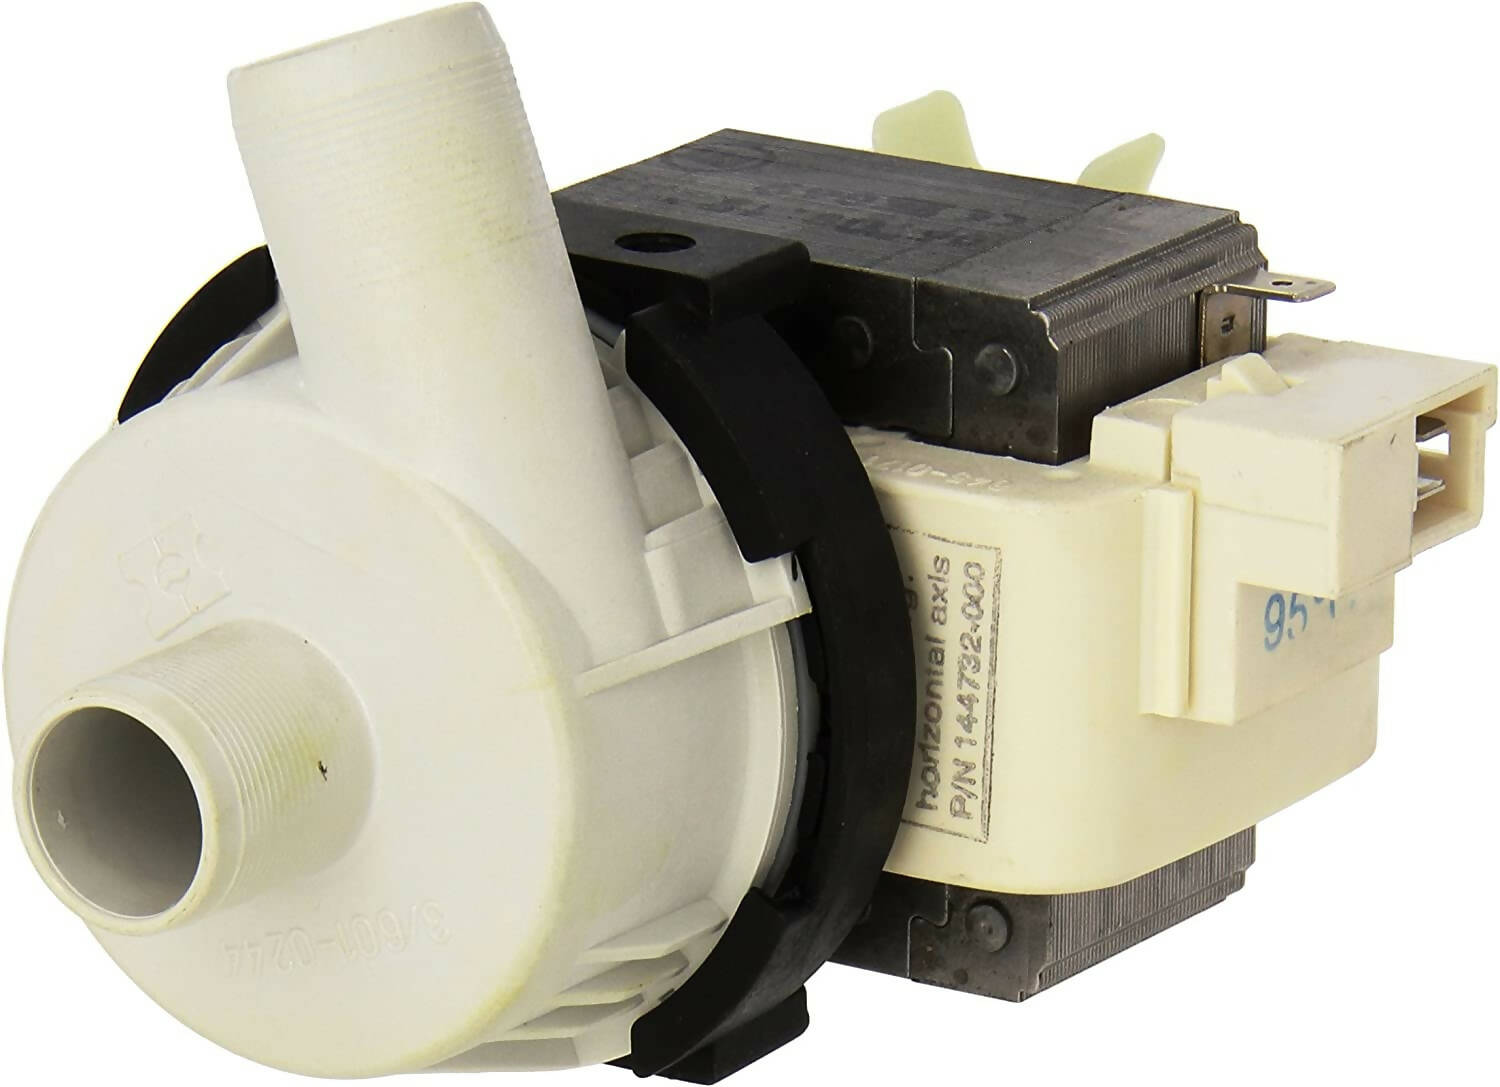 Frigidaire Washer Drain Pump & Motor Assembly - 5303292169, Replaces: AH461635 AP2144326 EA461635 EAP461635 PS461635 OEM PARTS WORLD